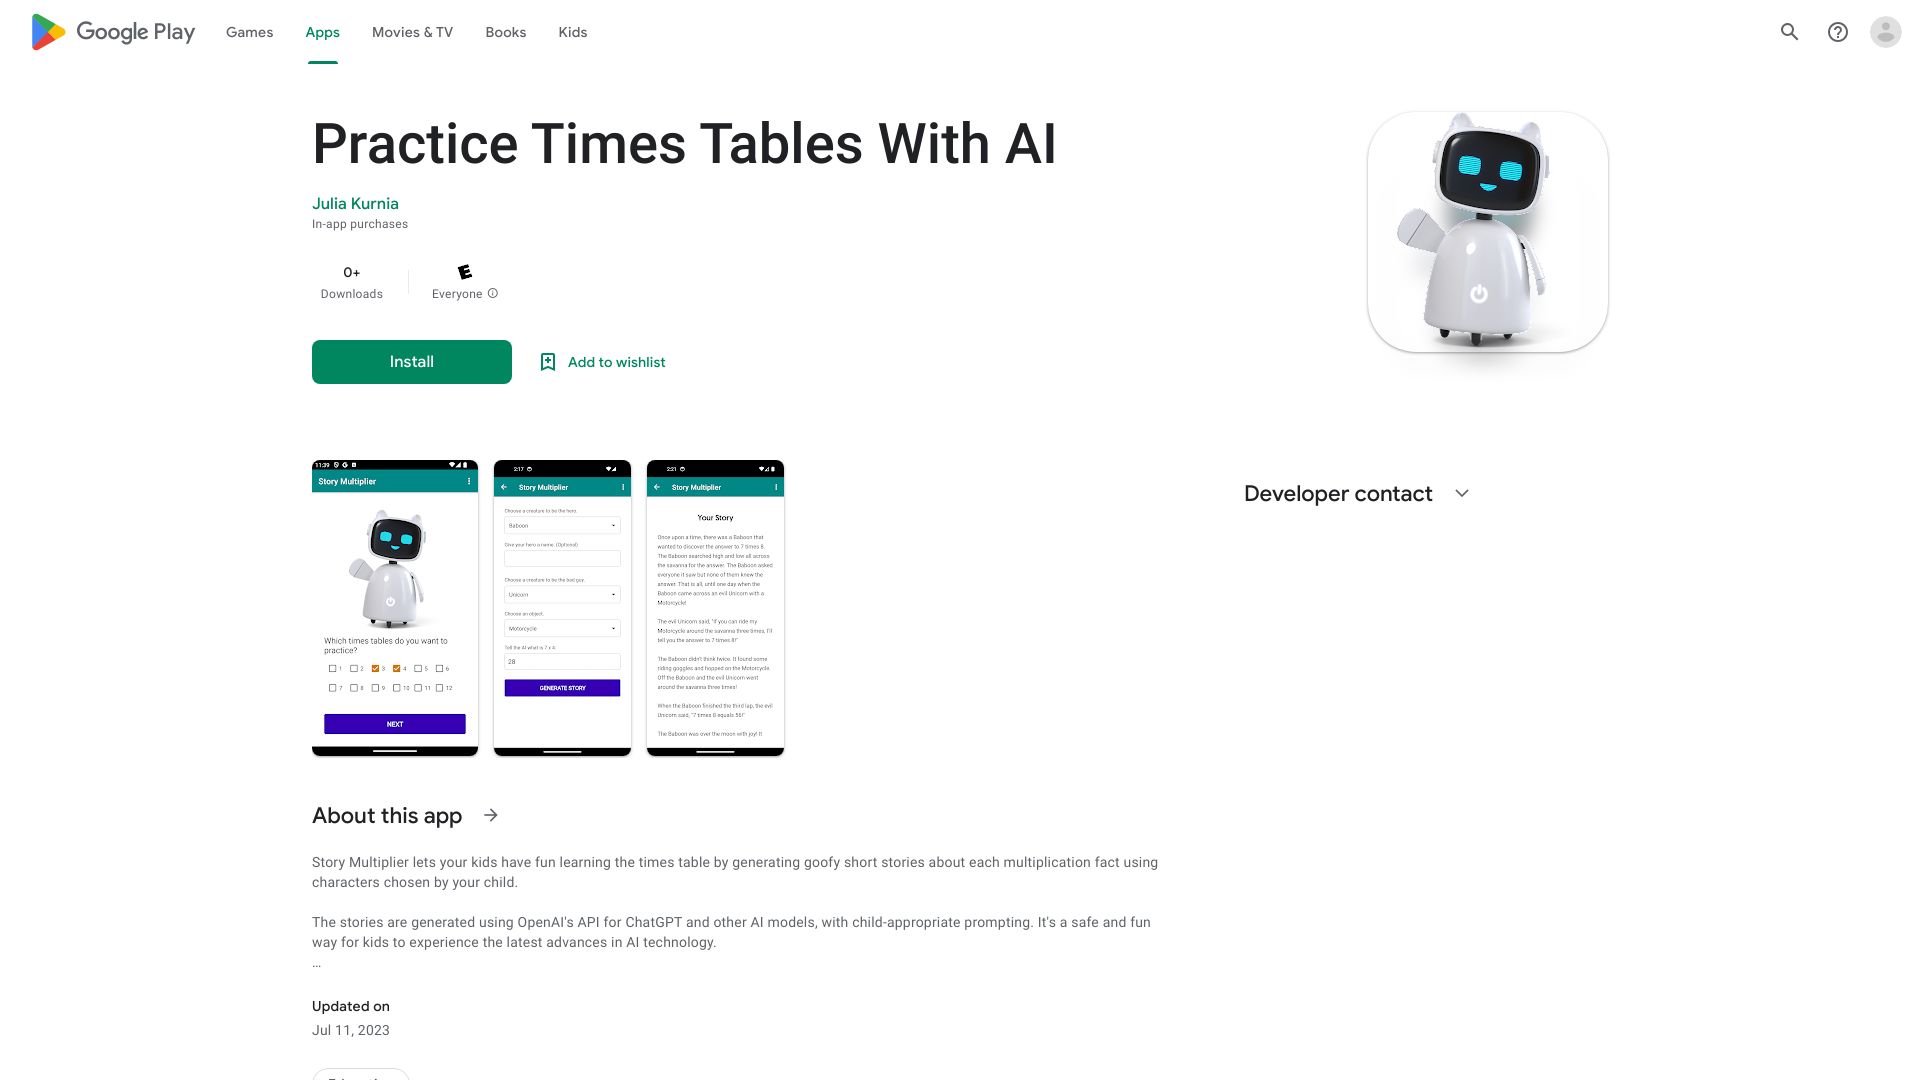 Practice Times Tables With AI